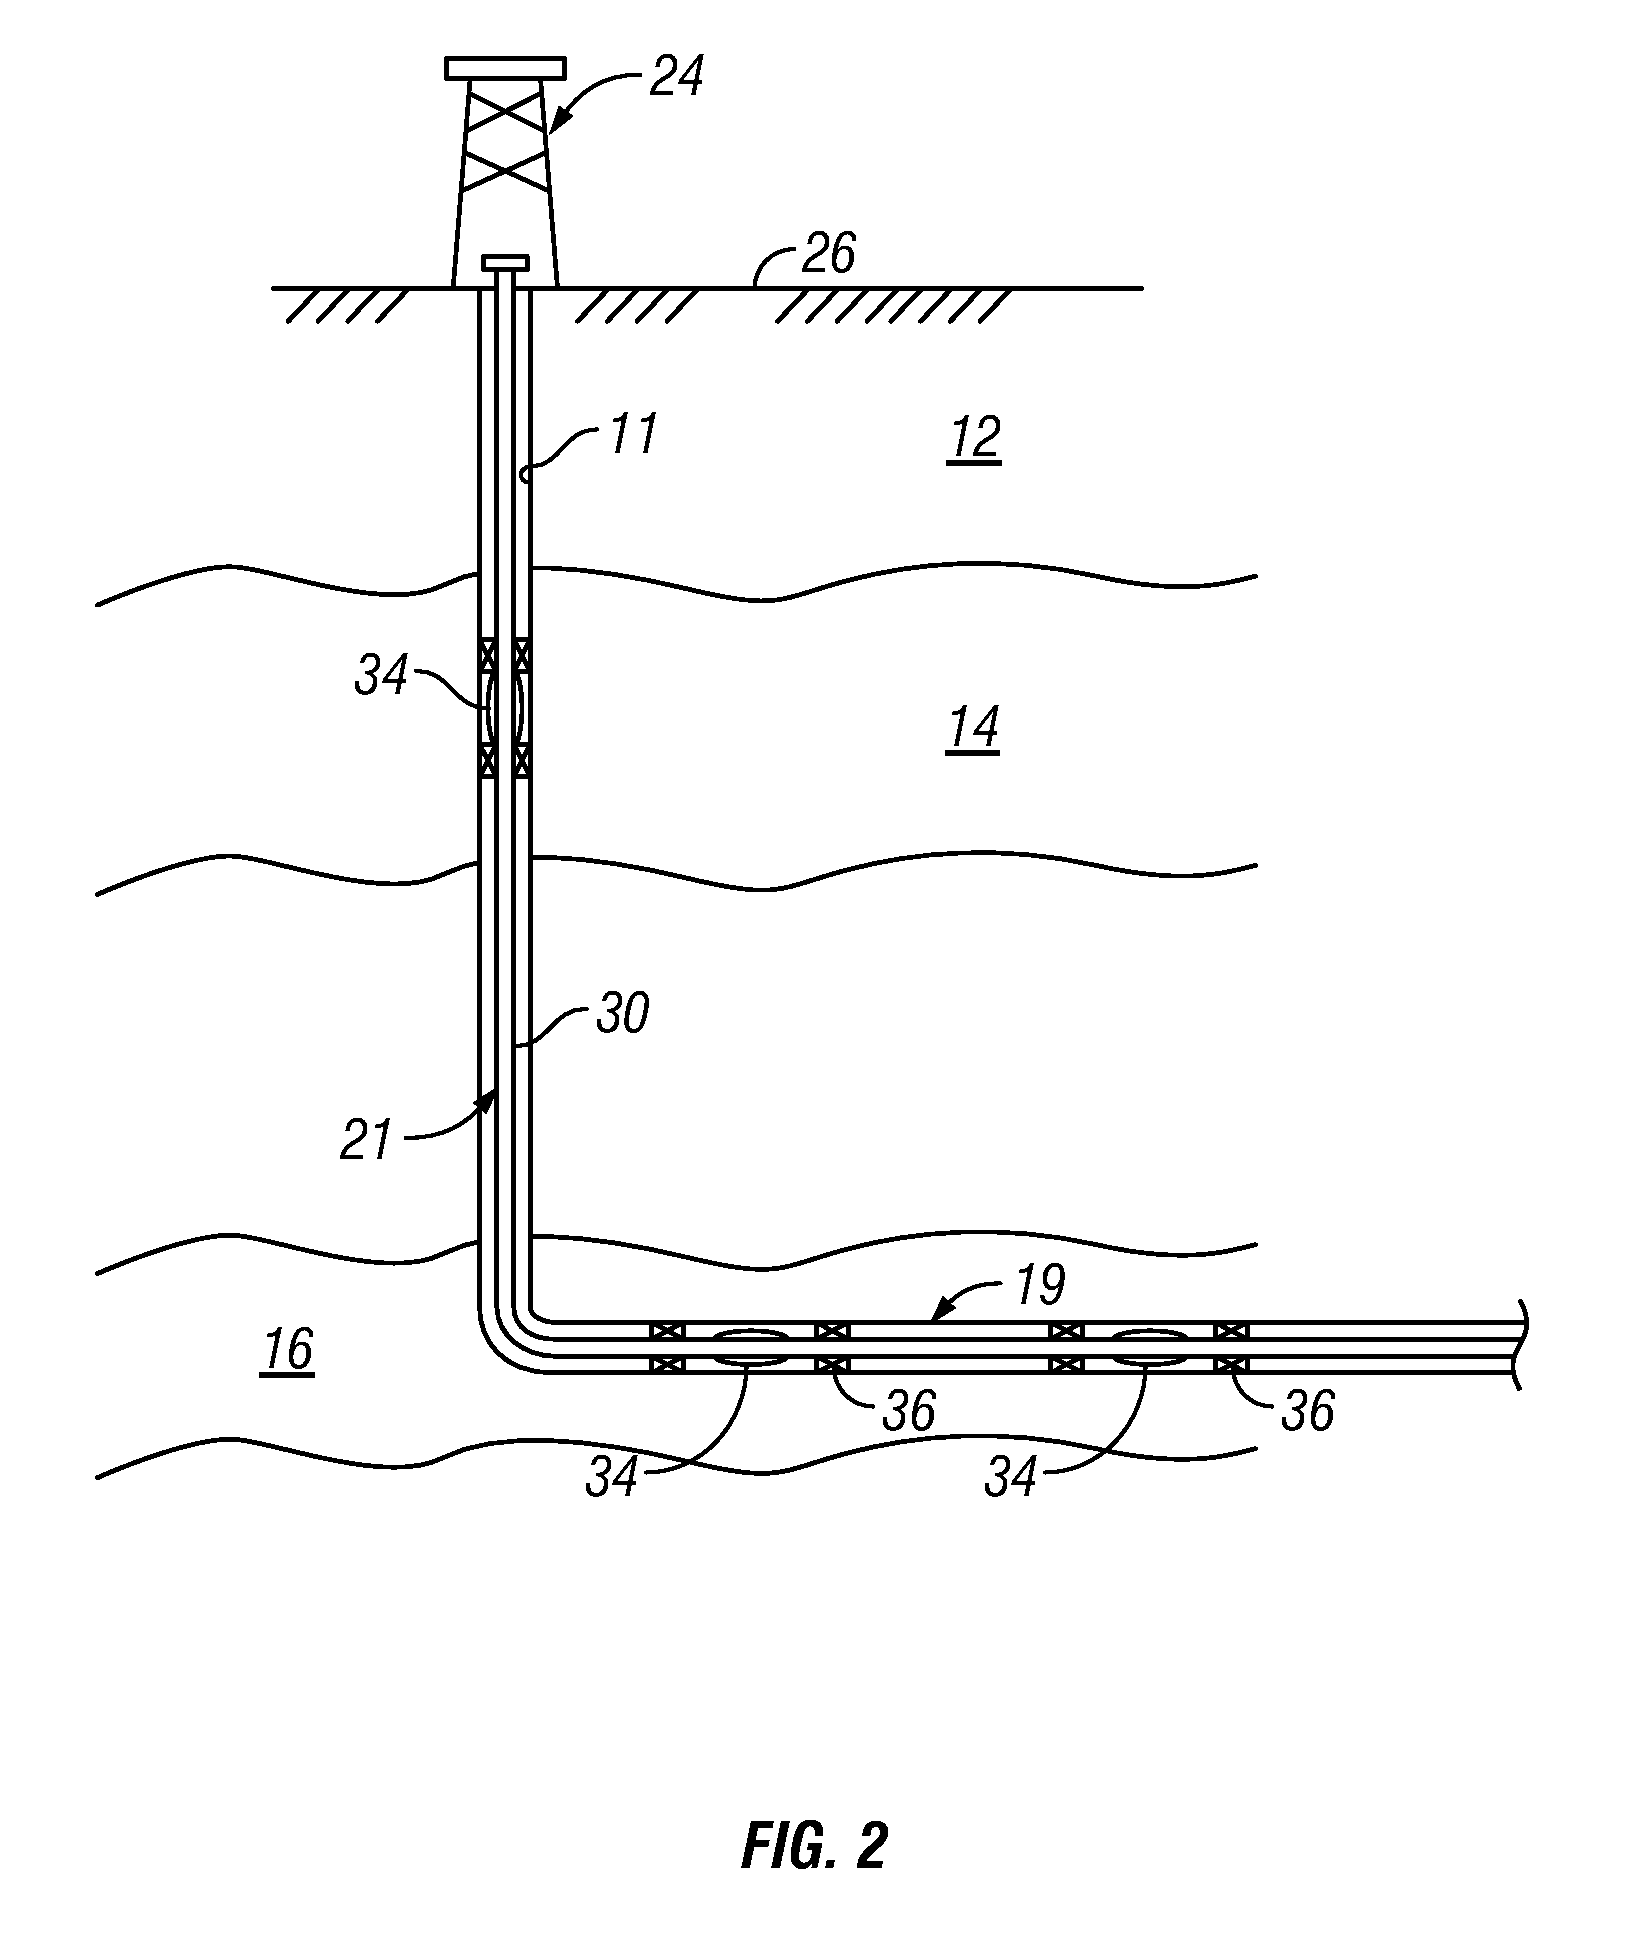 Water Dissolvable Materials for Activating Inflow Control Devices That Control Flow of Subsurface Fluids